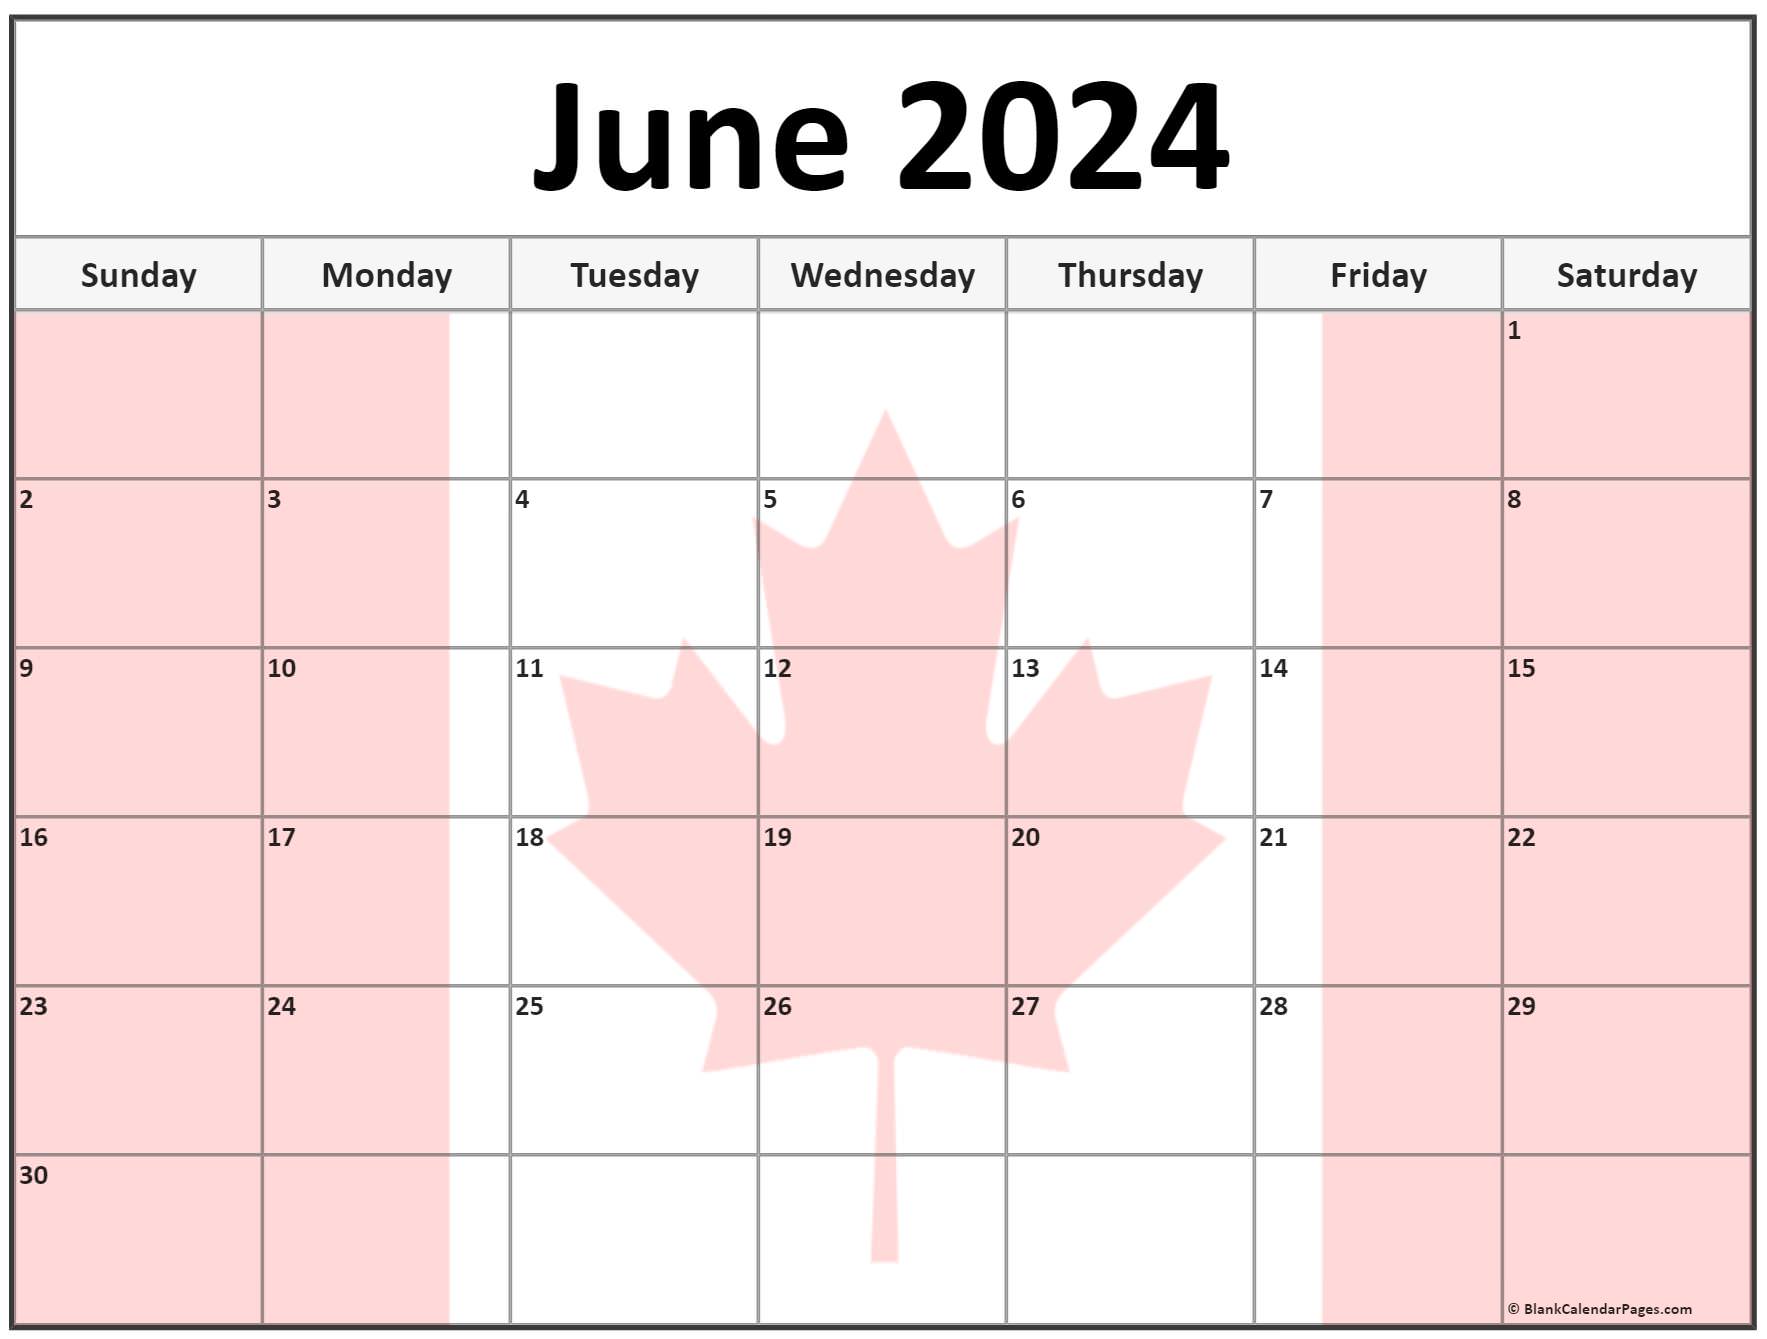 Collection of June 2023 photo calendars with image filters.